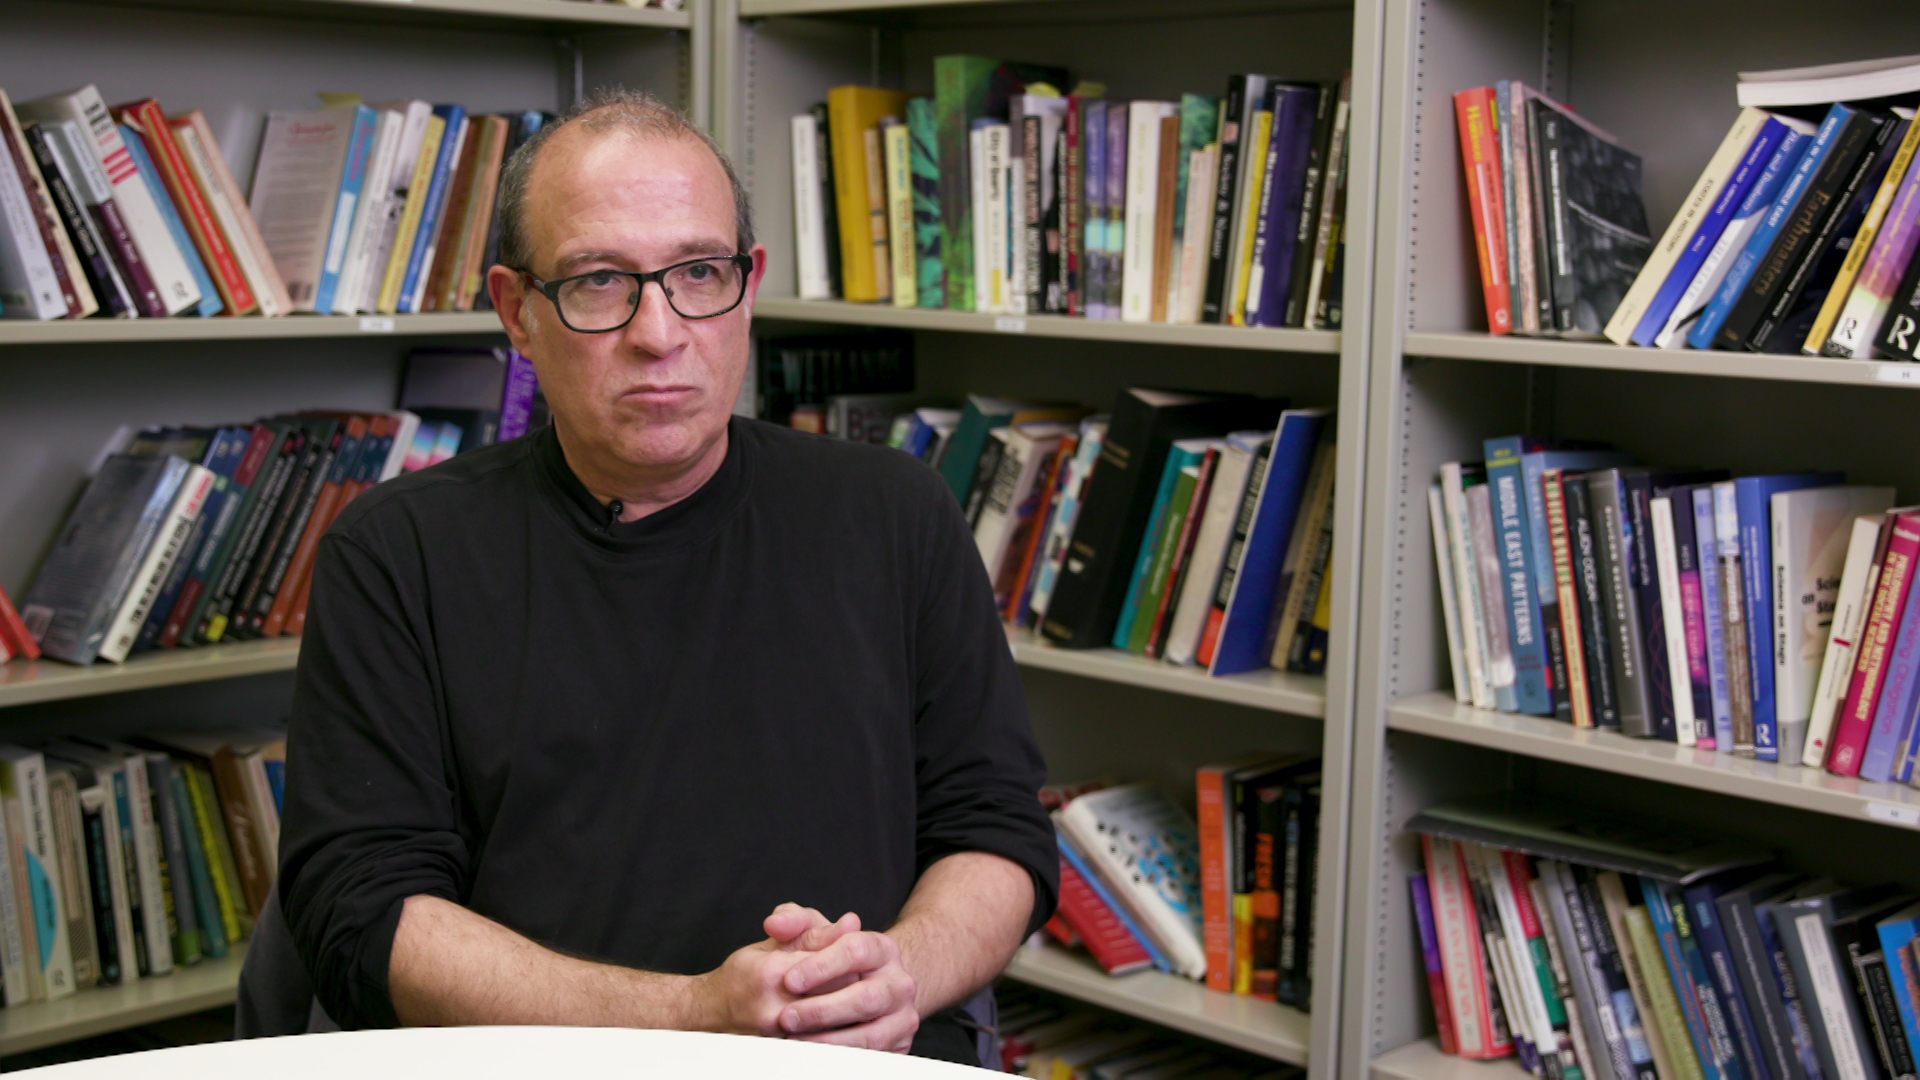 Samer Alatout sits at a table with his hands folded in his lap, with multiple metal bookshelves filled with books arranged at a right-angle behind him.